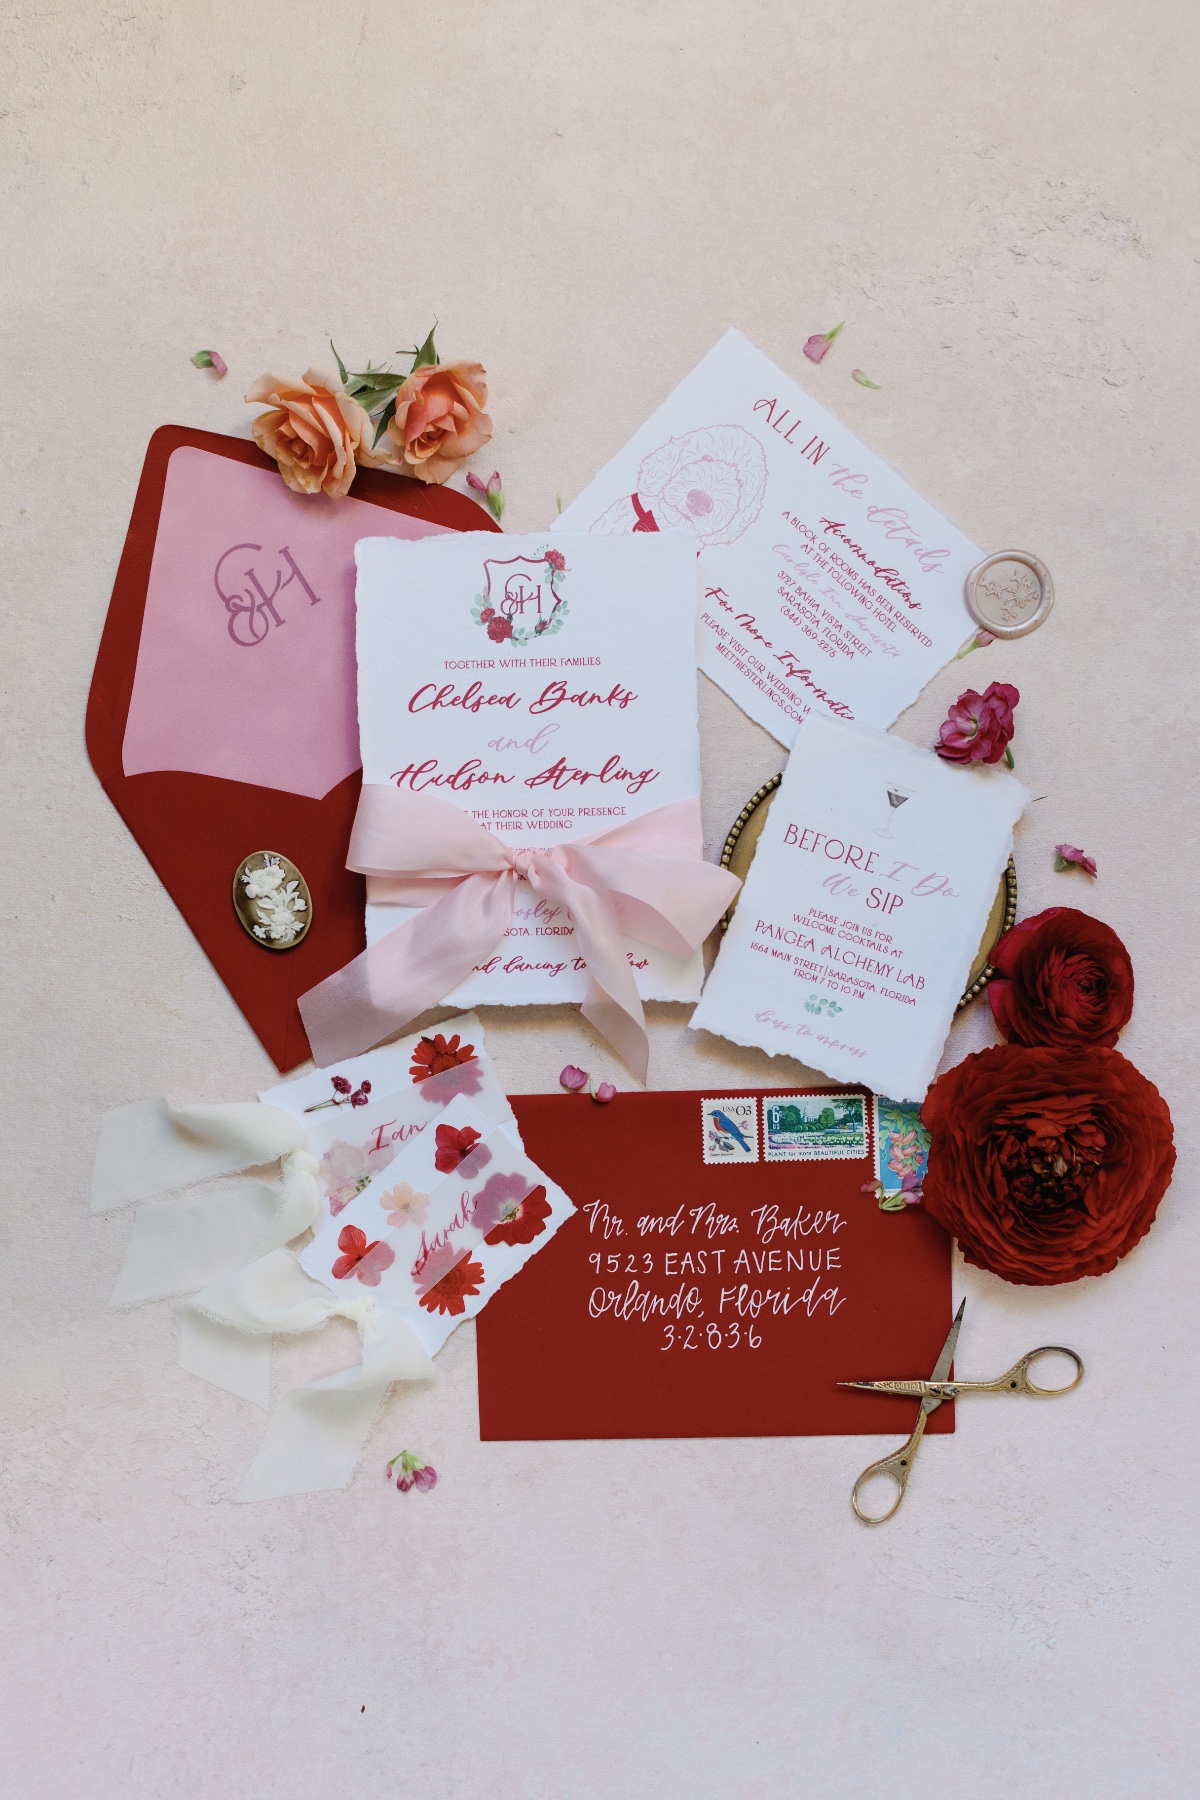 Vibrant red and white wedding invitations with pink ribbon